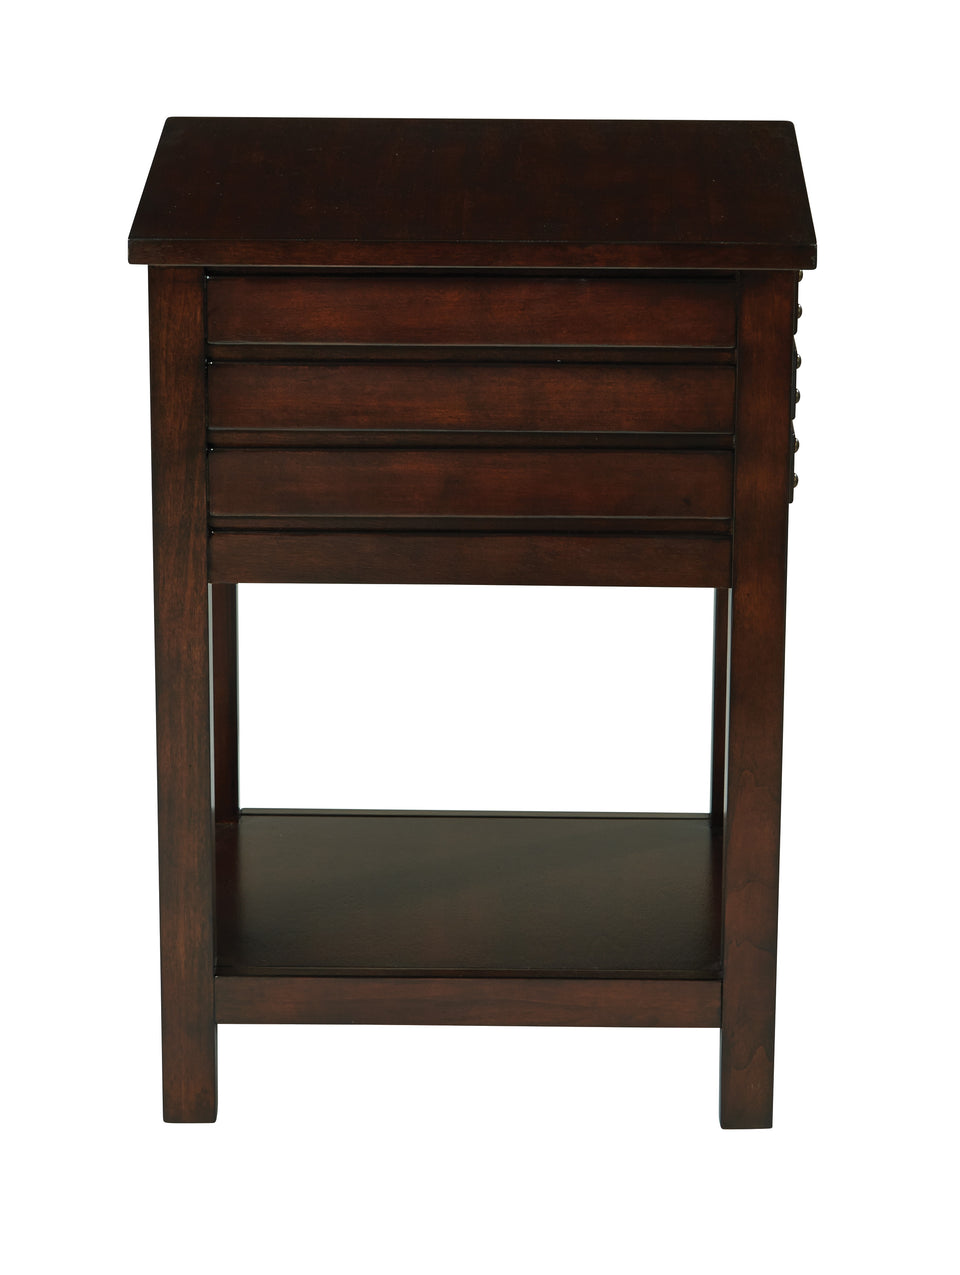 camille walnut side table with nailhead accents and single drawer side view